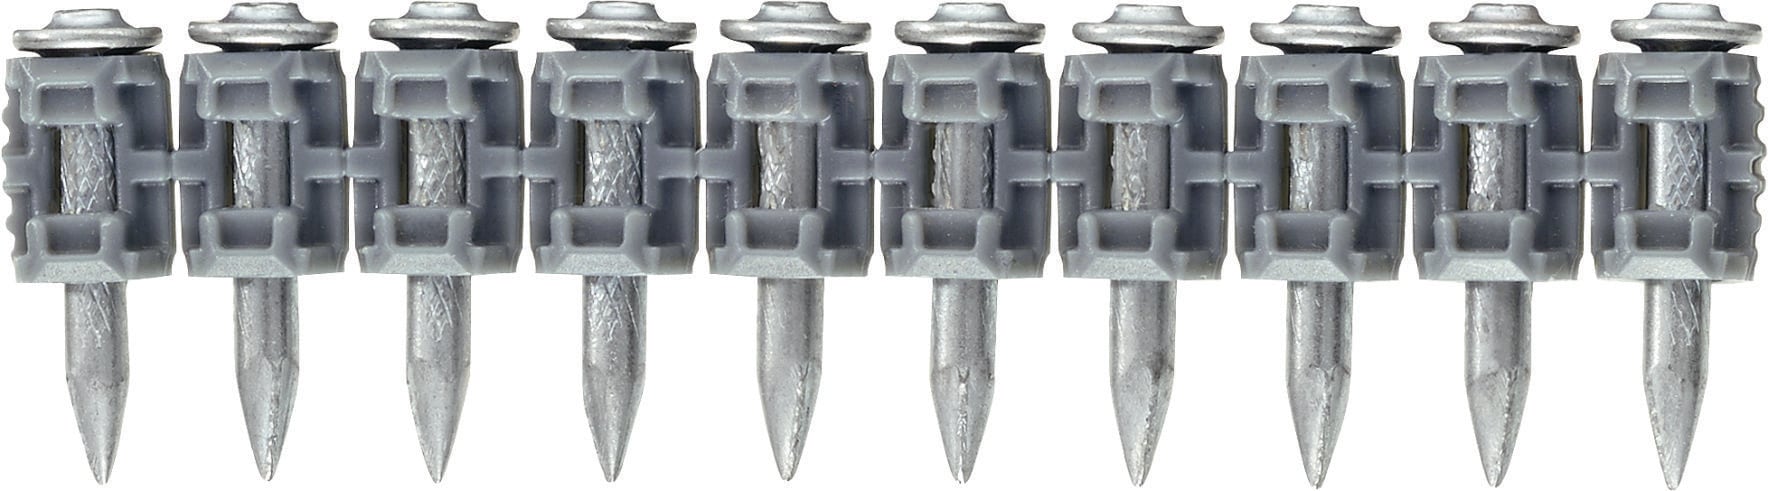 Hilti GX3 Gas Nails 1/2" X-S 14 G3 MX Pack of 100 For Concrete & Steel 